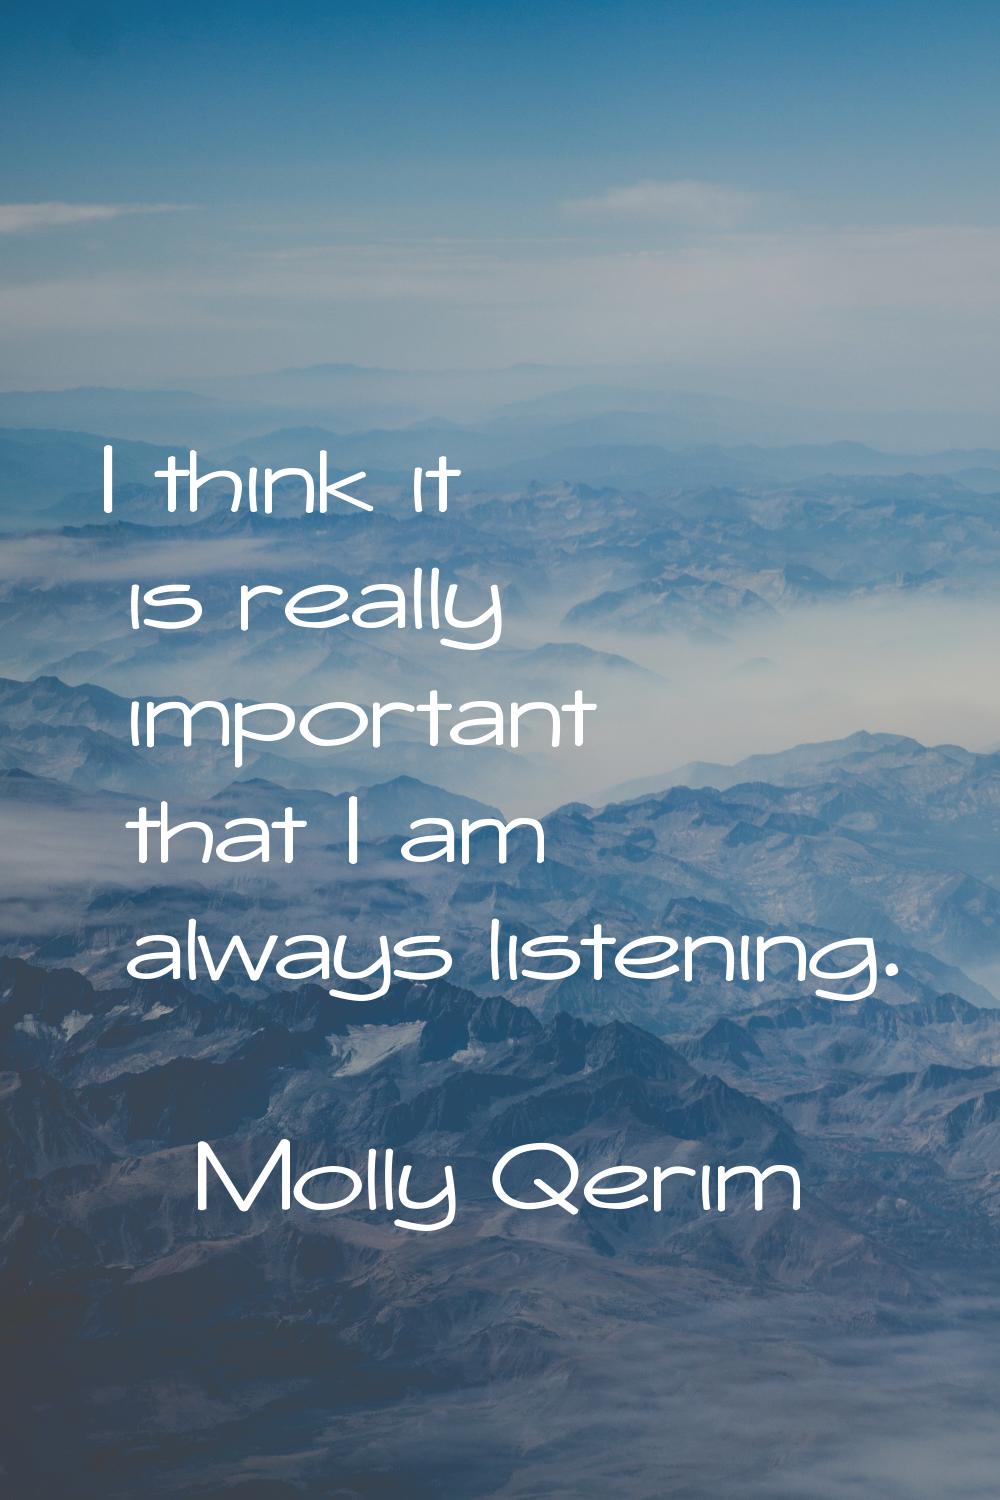 I think it is really important that I am always listening.